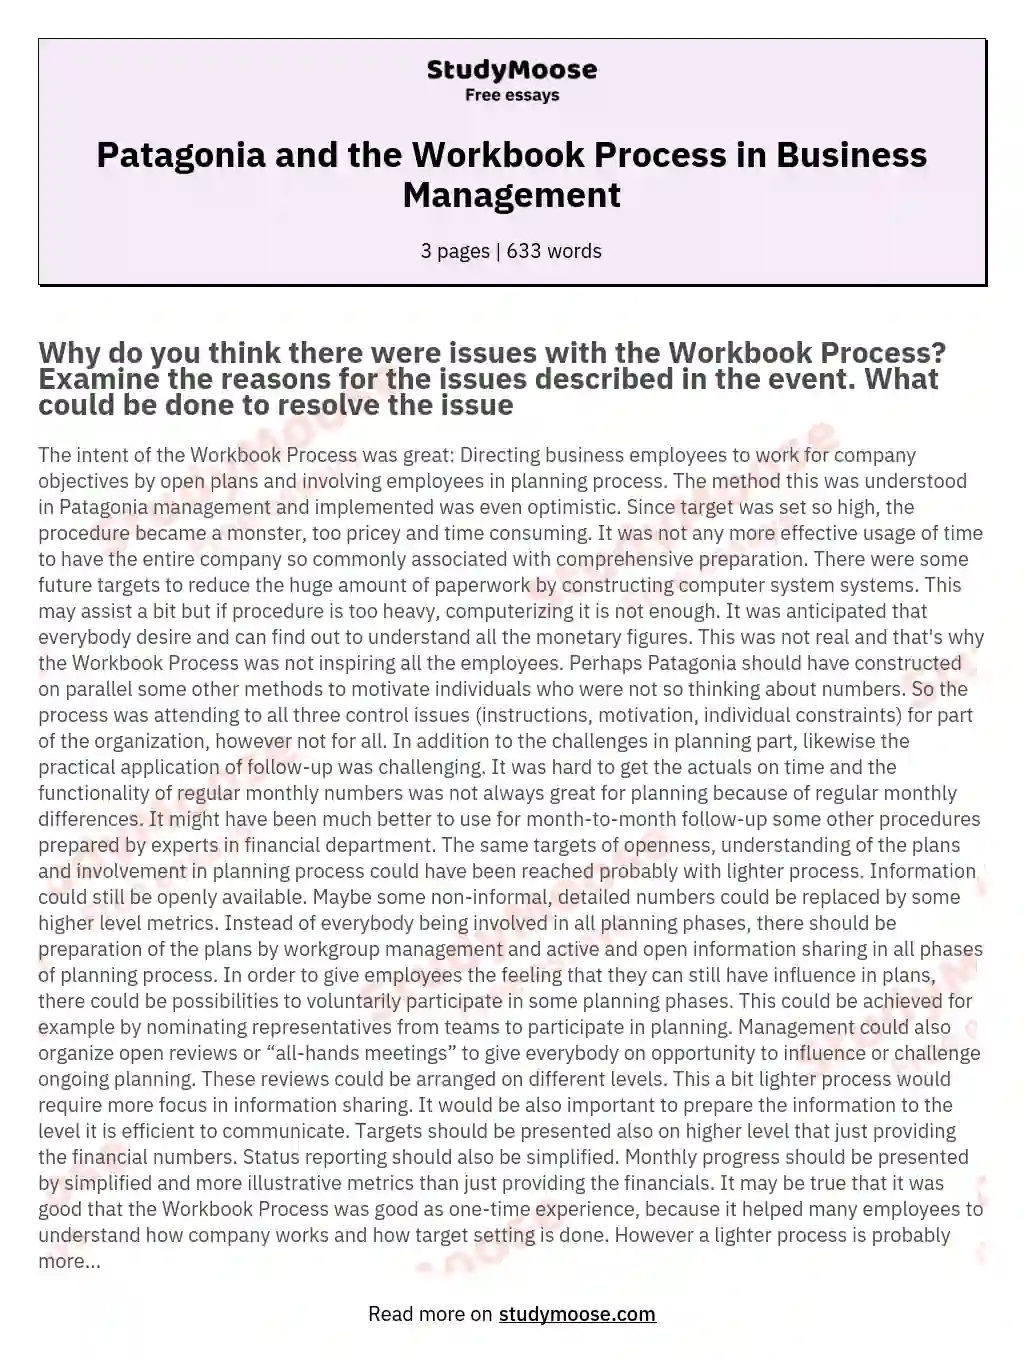 Patagonia and the Workbook Process in Business Management essay